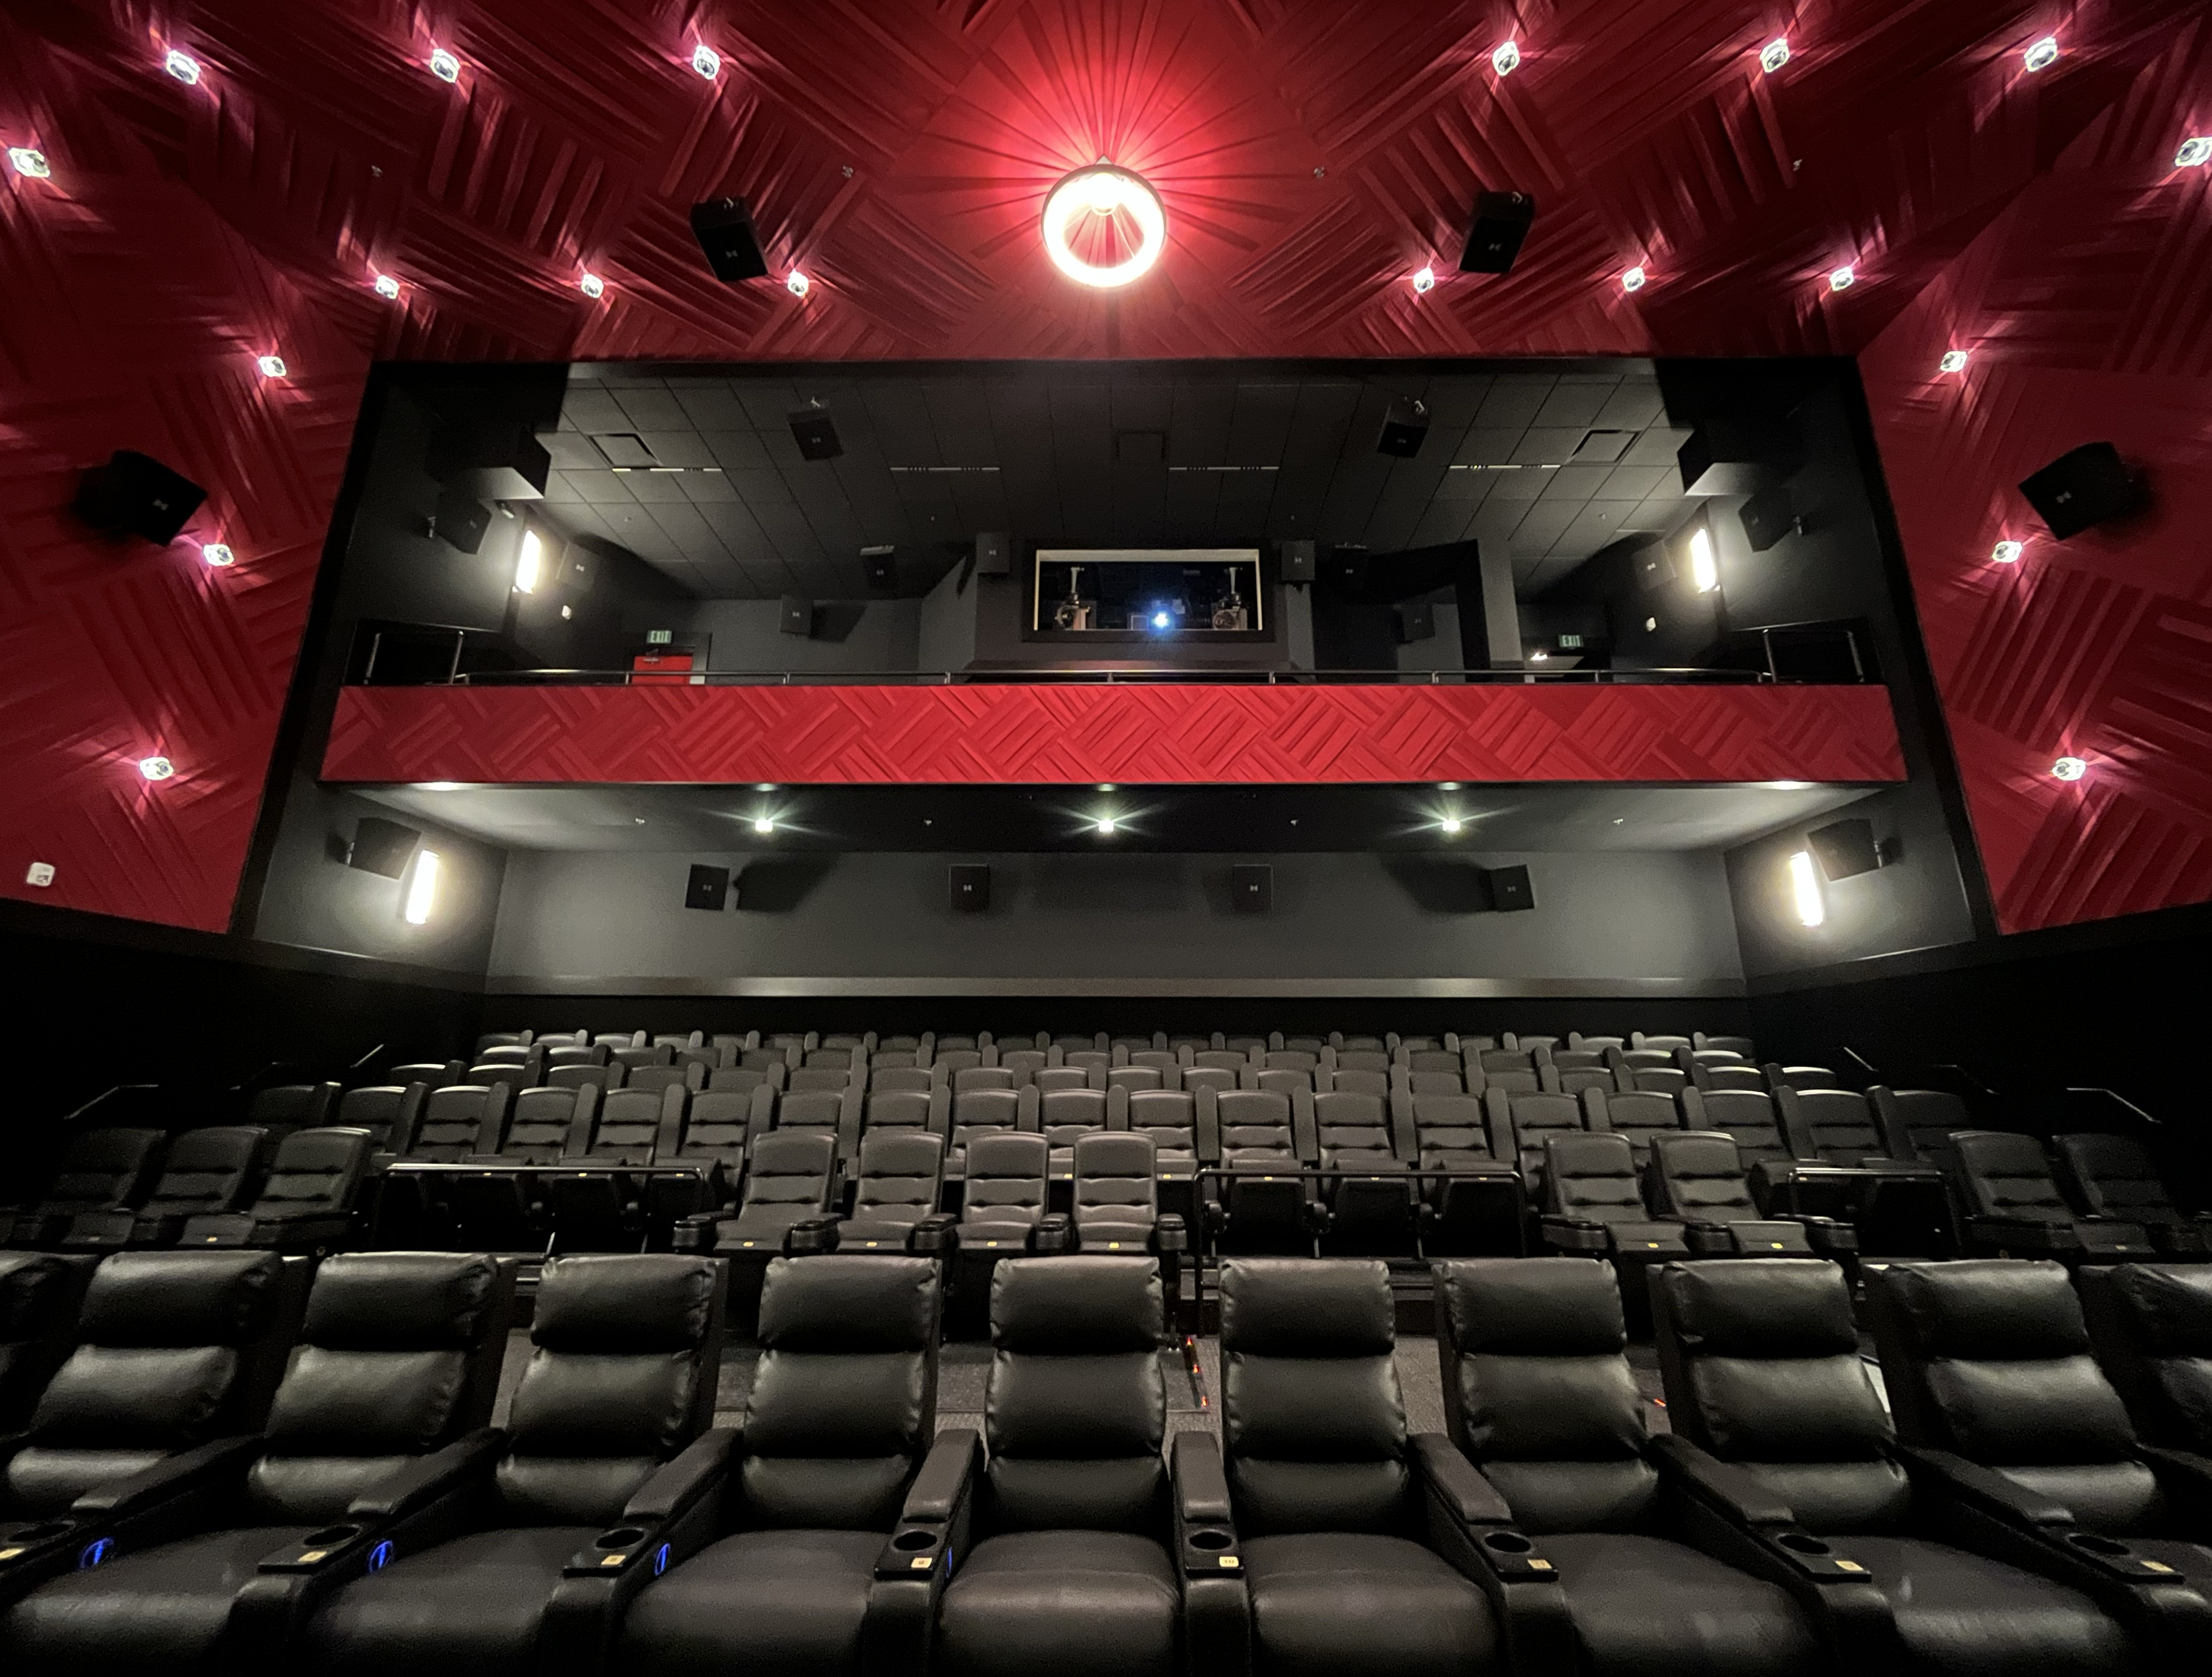 View of the back of a screening room with black theater seats and red overhead lighting